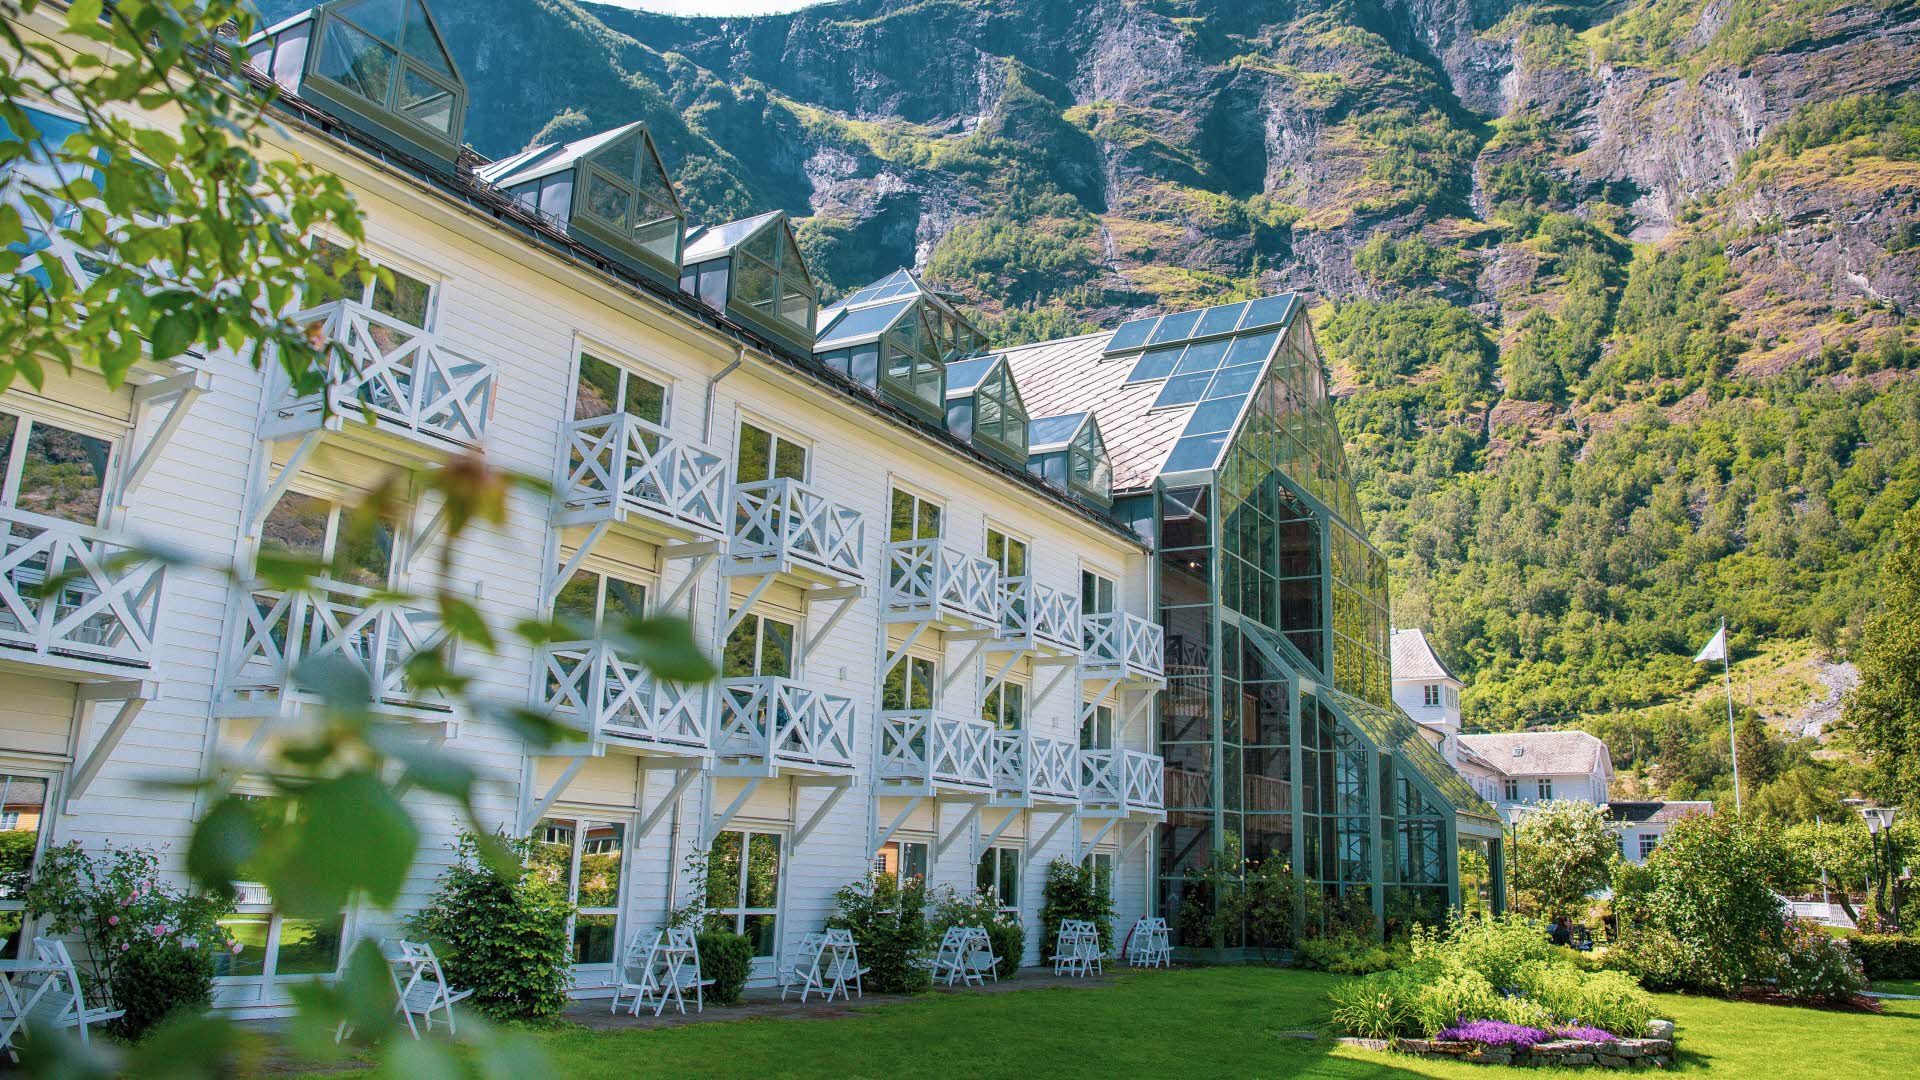 Fretheim Hotel seen from the garden in summer with leaves in front and steep mountains behind